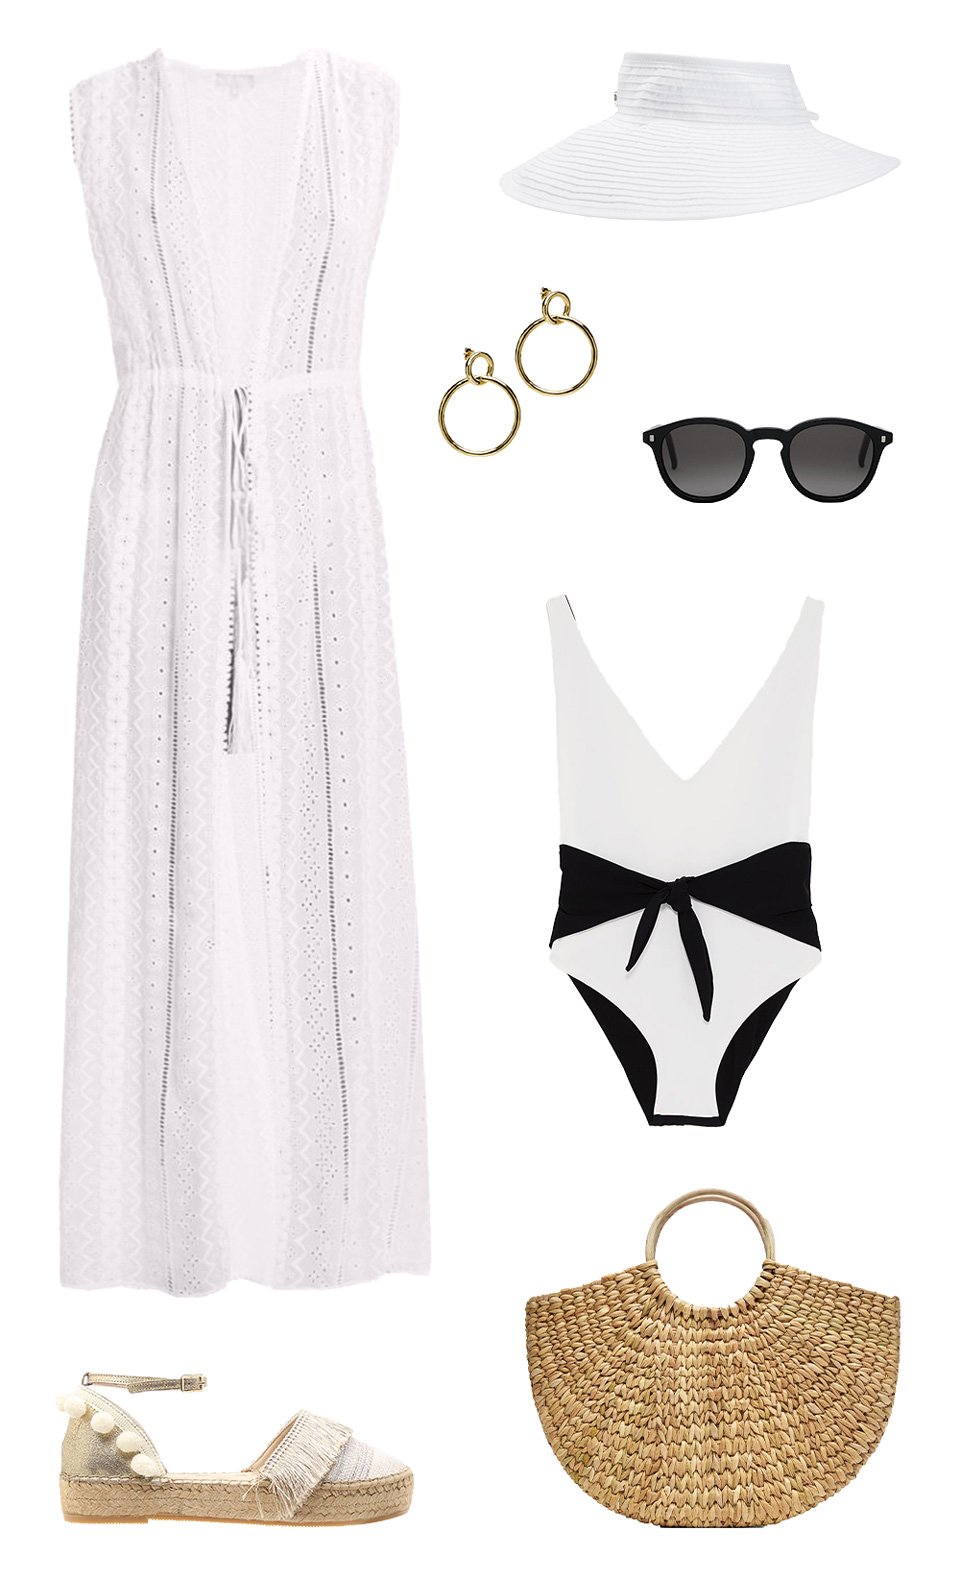 A stylish outfit - the perfect dress for the Italian Riviera